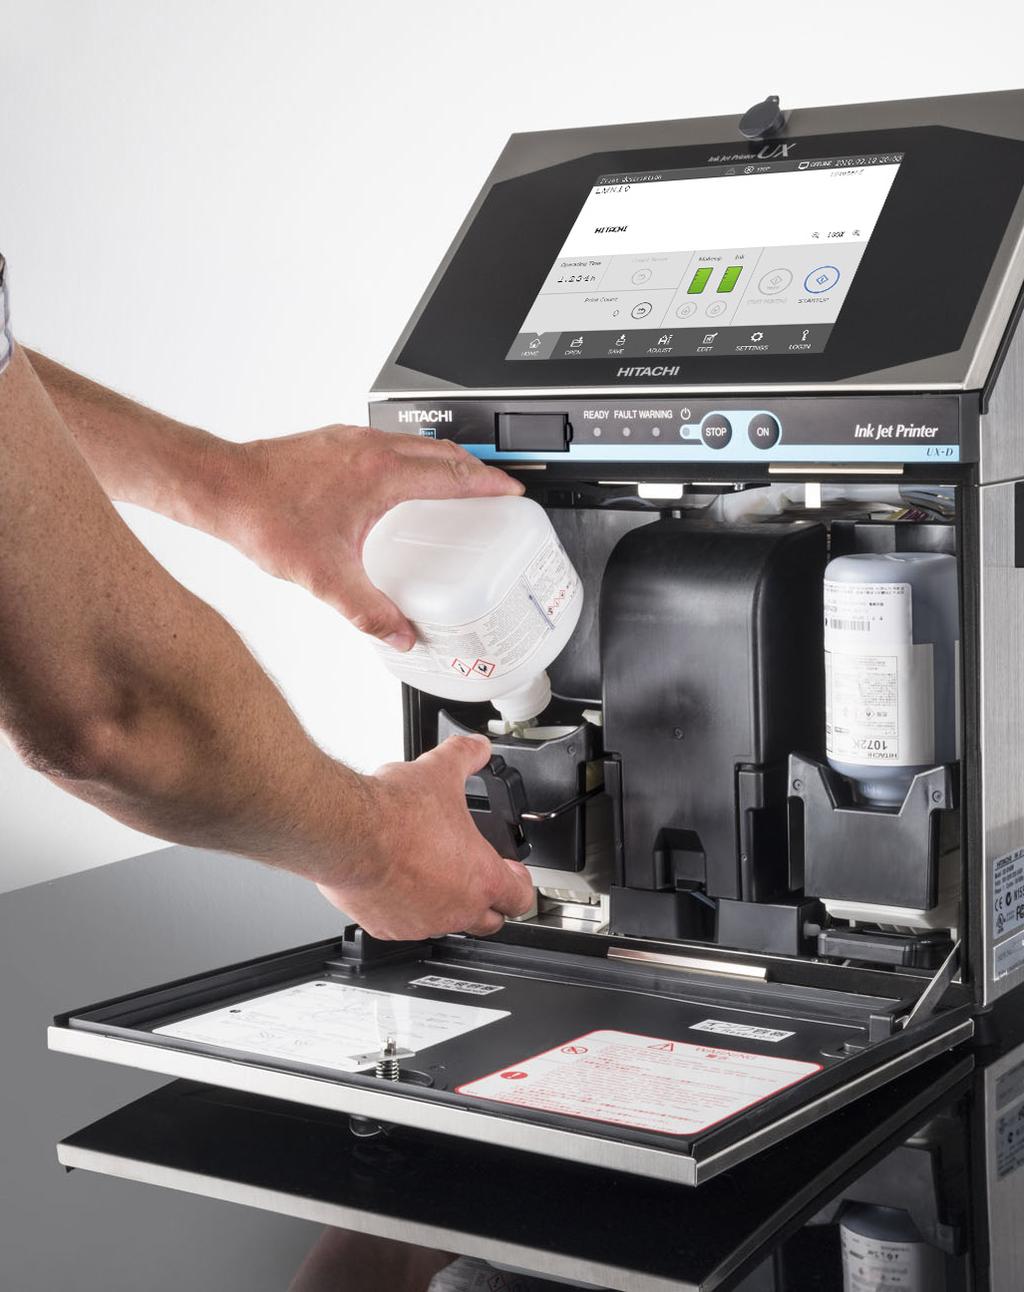 Hitachi UX SERIES SIMPLE FLUID MANAGEMENT The Hitachi UX Series comes with two fluid management system styles: Cartridge or pour-in style so that you can customize your inkjet printer to fit your